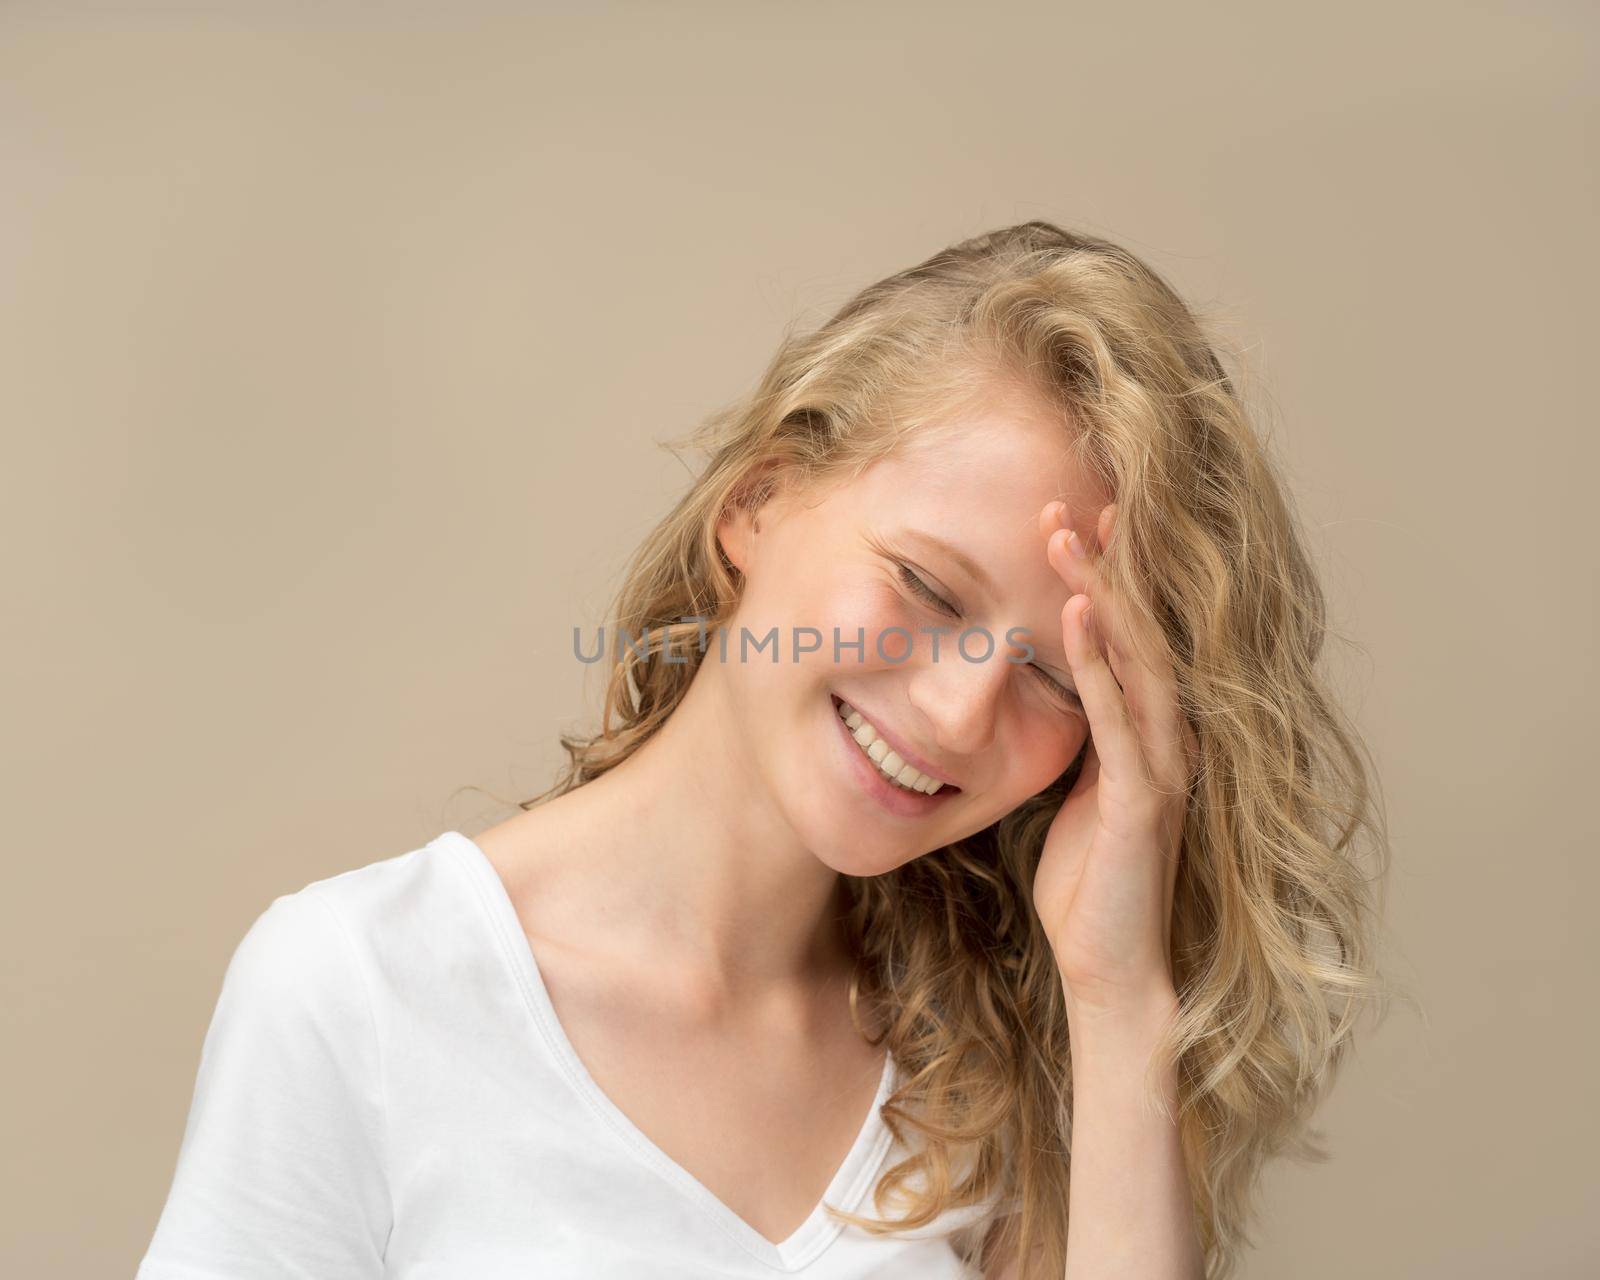 Beautiful young girl laughing. Pretty blonde with curly hair in white t shirt against beige wall smiling and covering face with hand